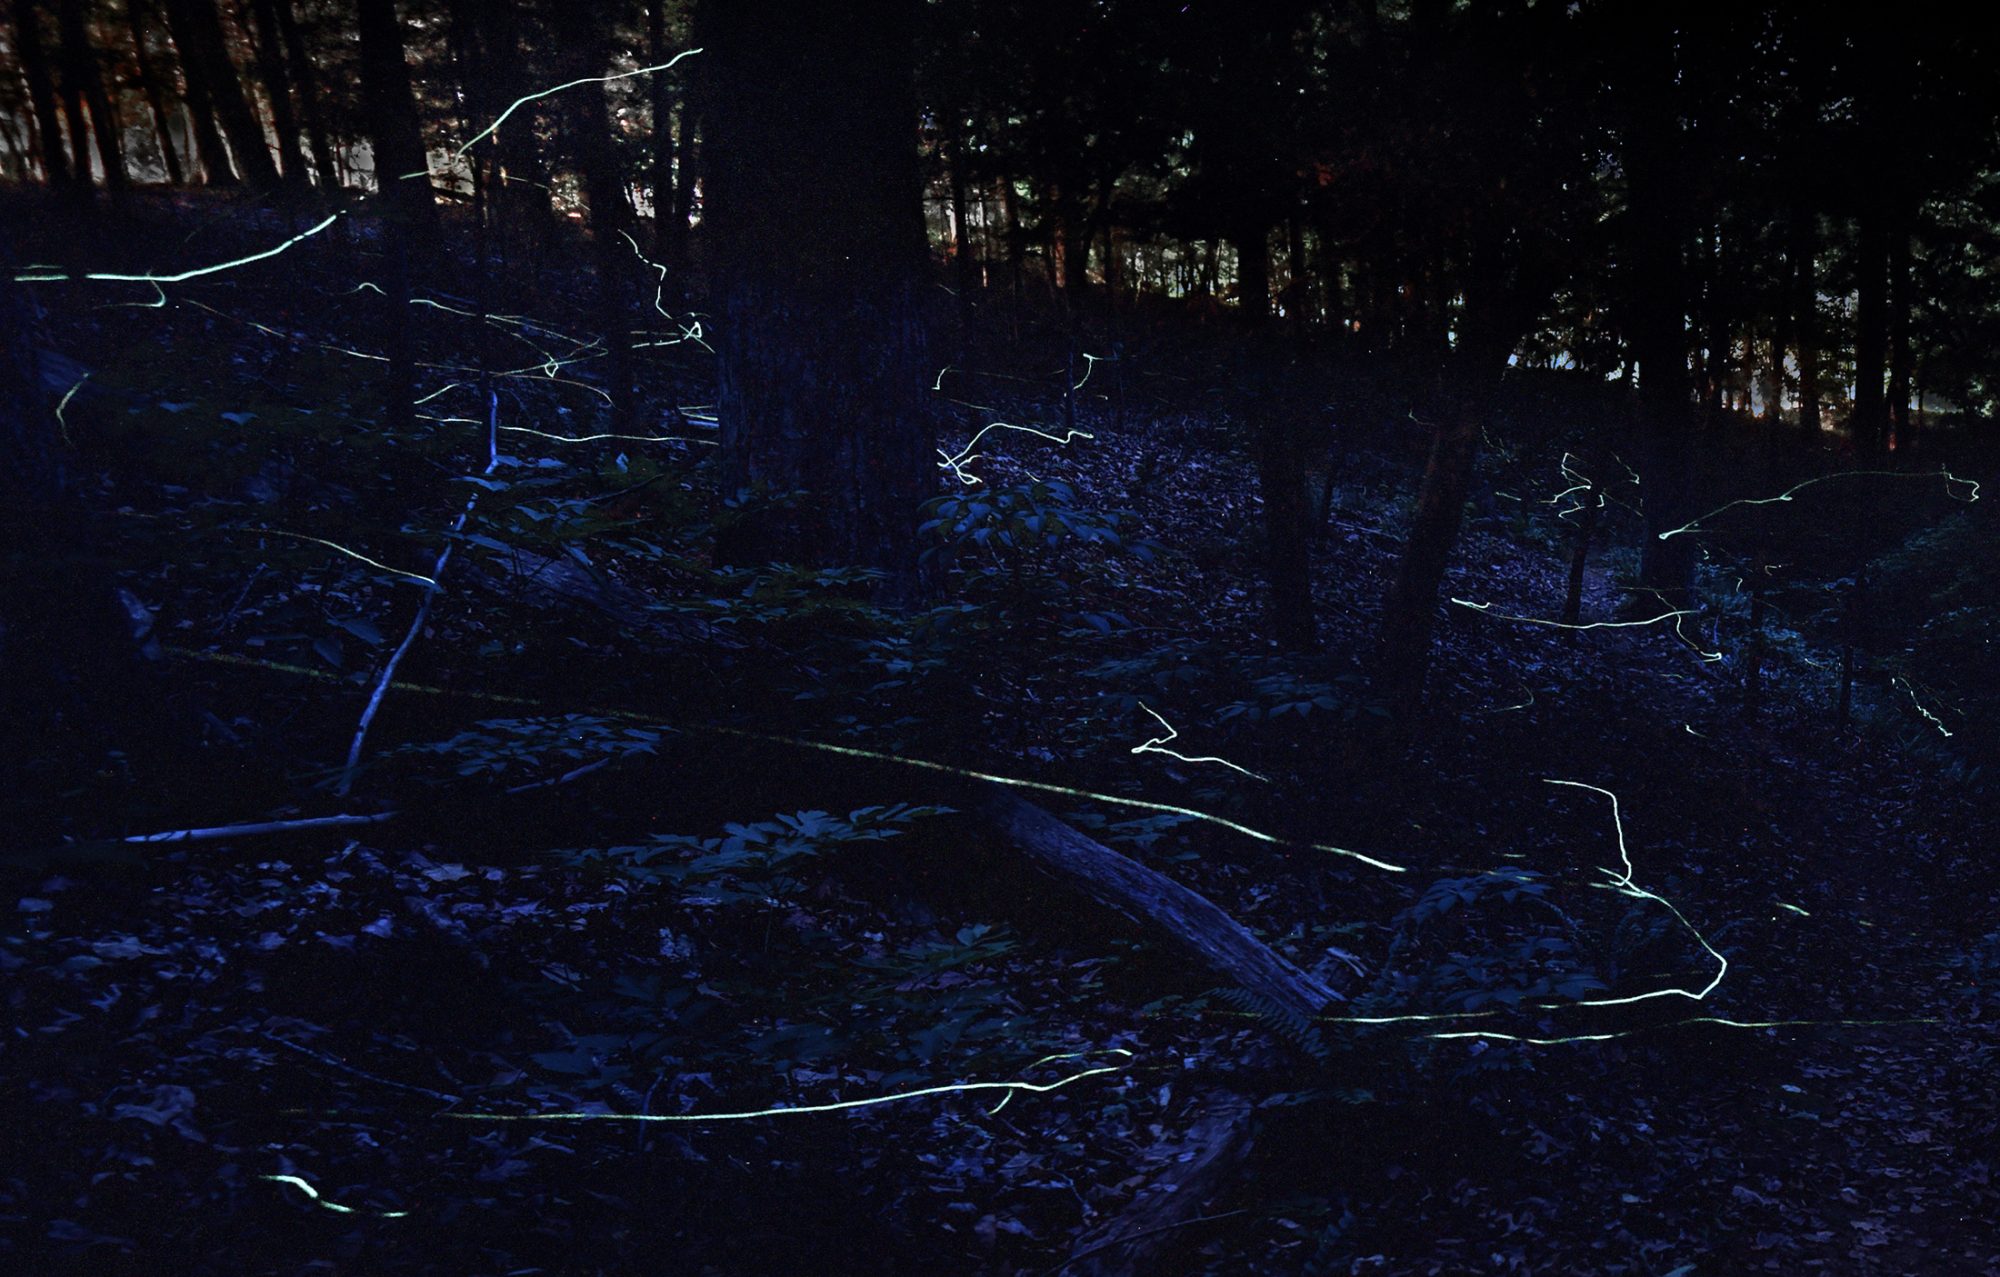 Firefly trails in a dark forest